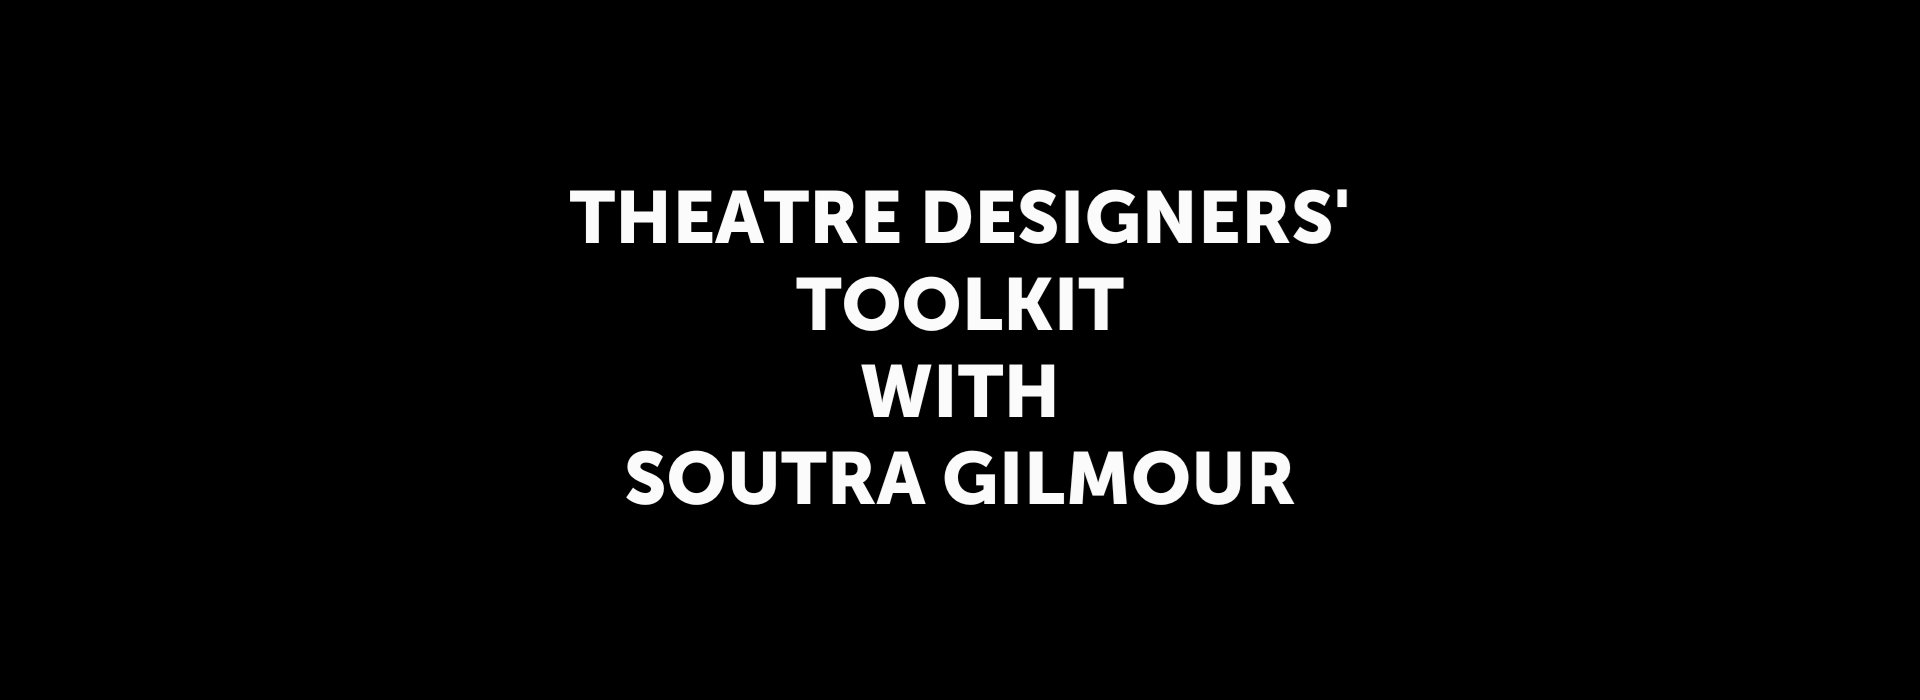 Theatre Designers' Toolkit with Soutra Gilmor